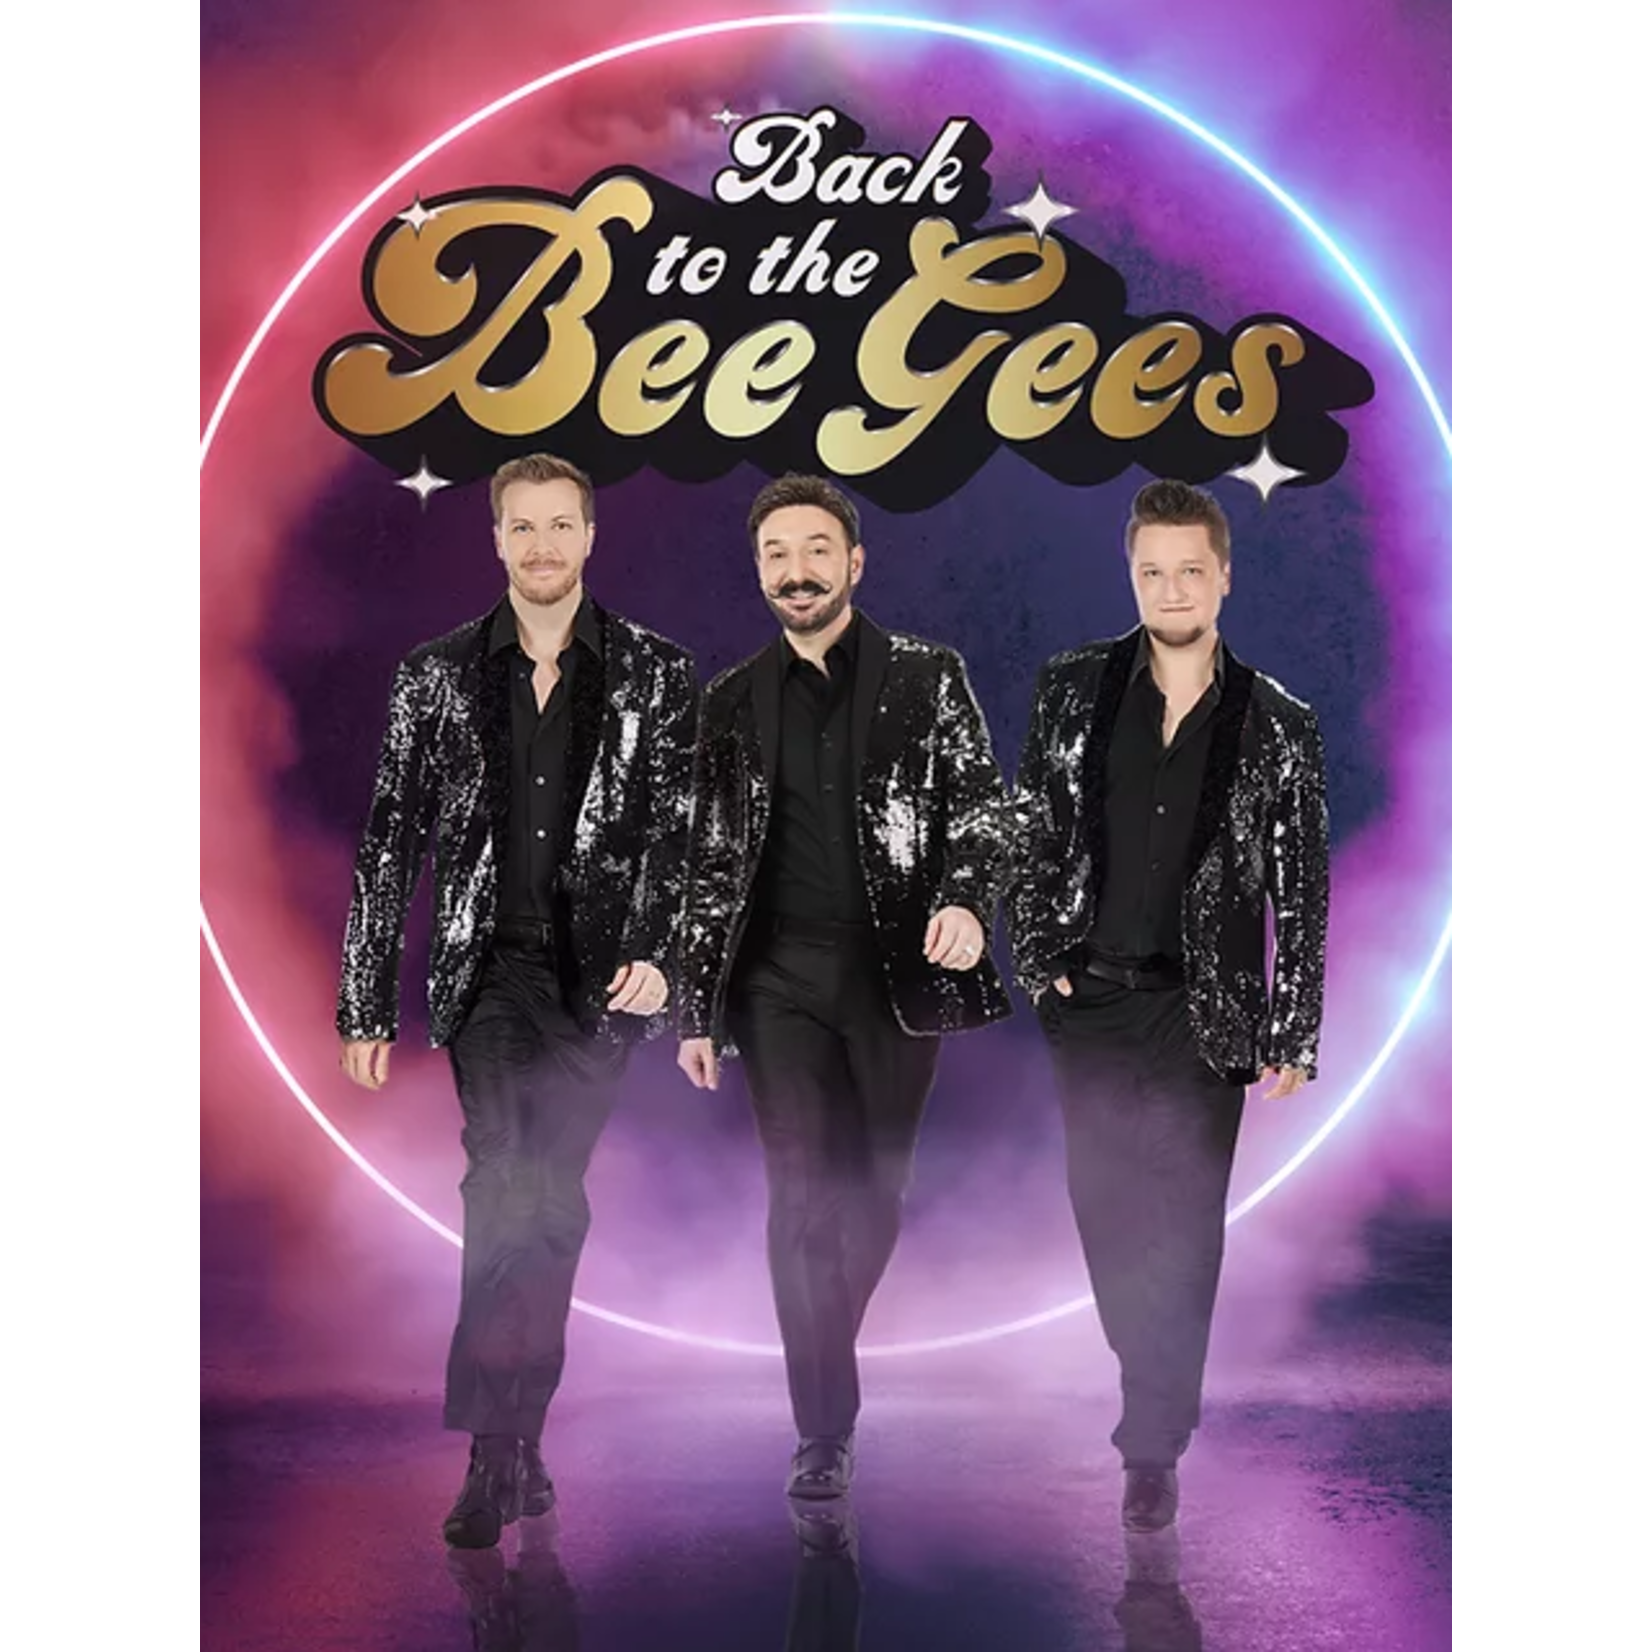 MO-Branson-Hamners' Variety Theatre-Branson MO-Branson-Hamners' Variety Theatre-Branson $68.54 Pair of tickets-Back To The Bee Gees